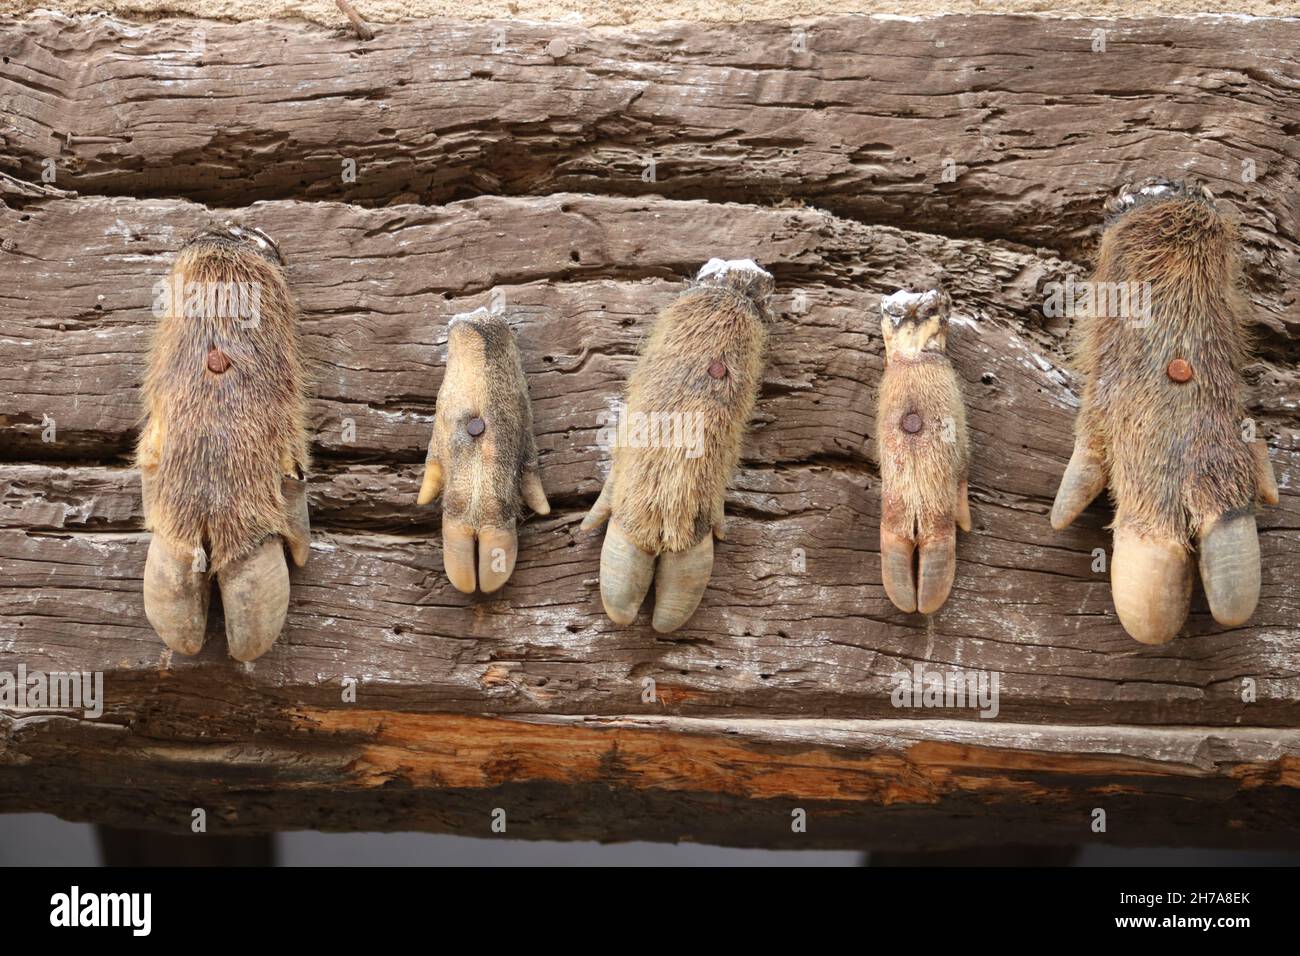 Five boar's feet nailed to an old wooden lintel in Spain as hunting trophies Stock Photo